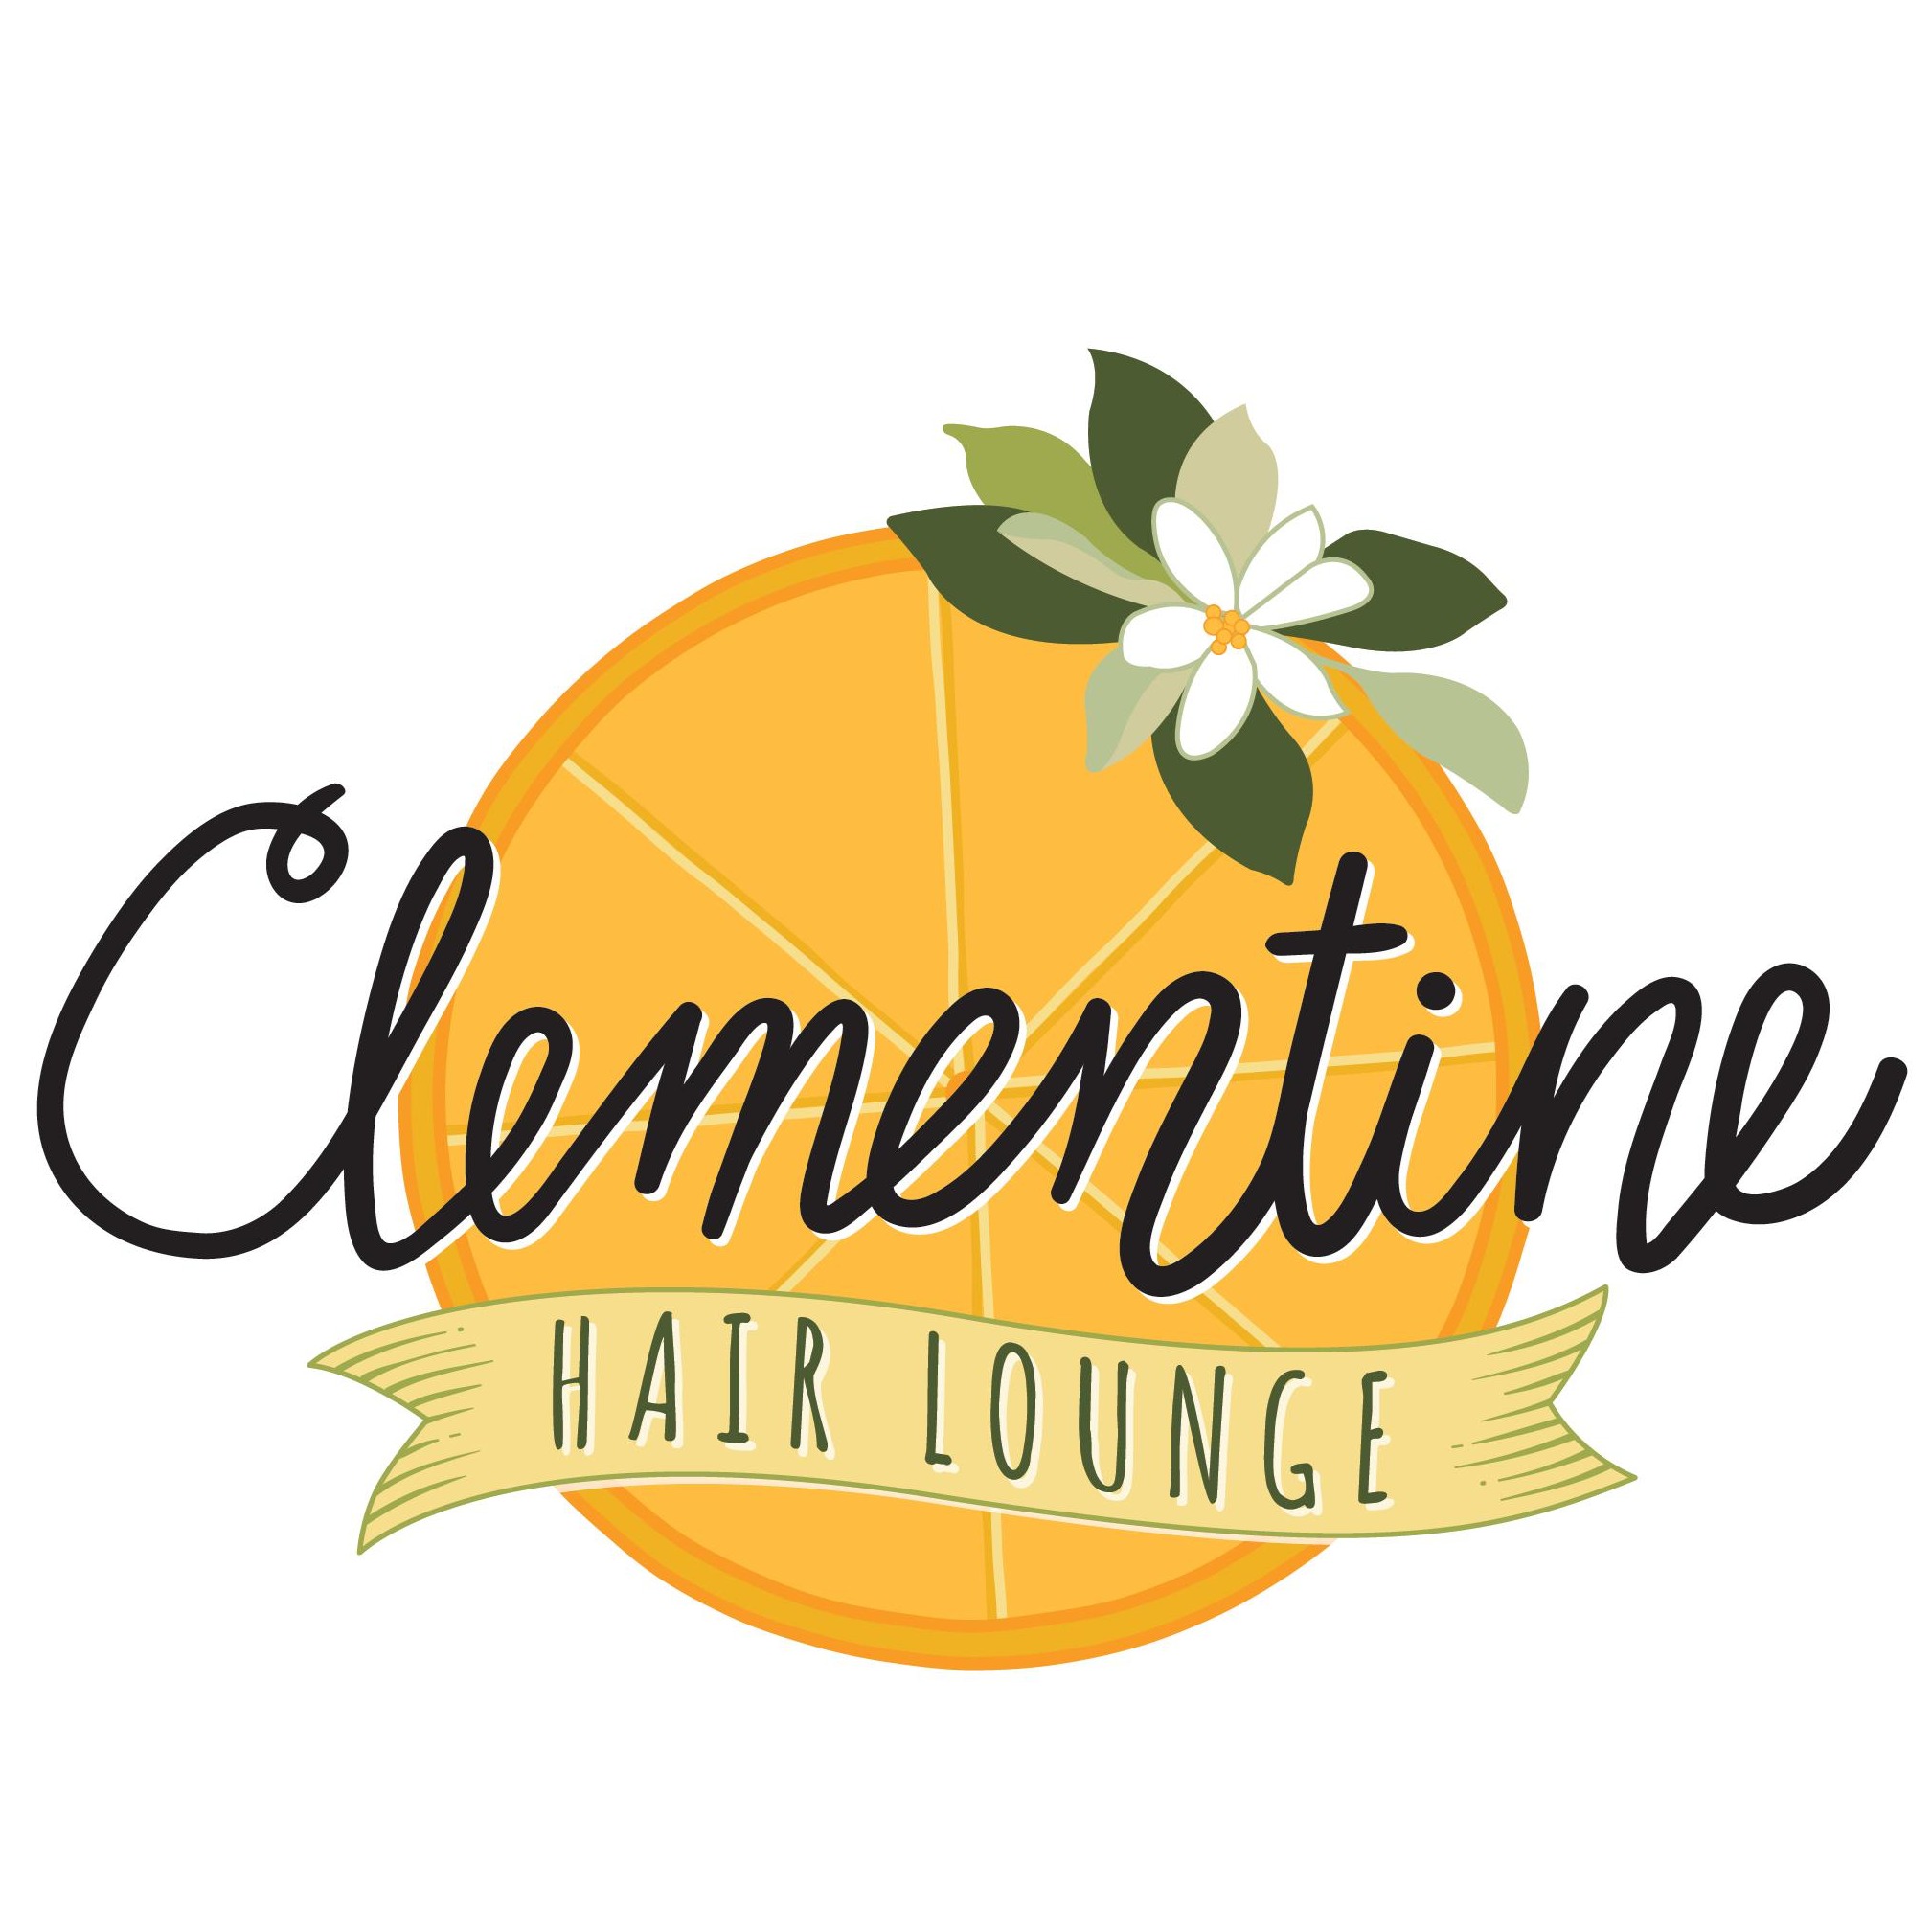 Clementine Hair Lounge - Norman, OK 73069 - (405)217-2880 | ShowMeLocal.com